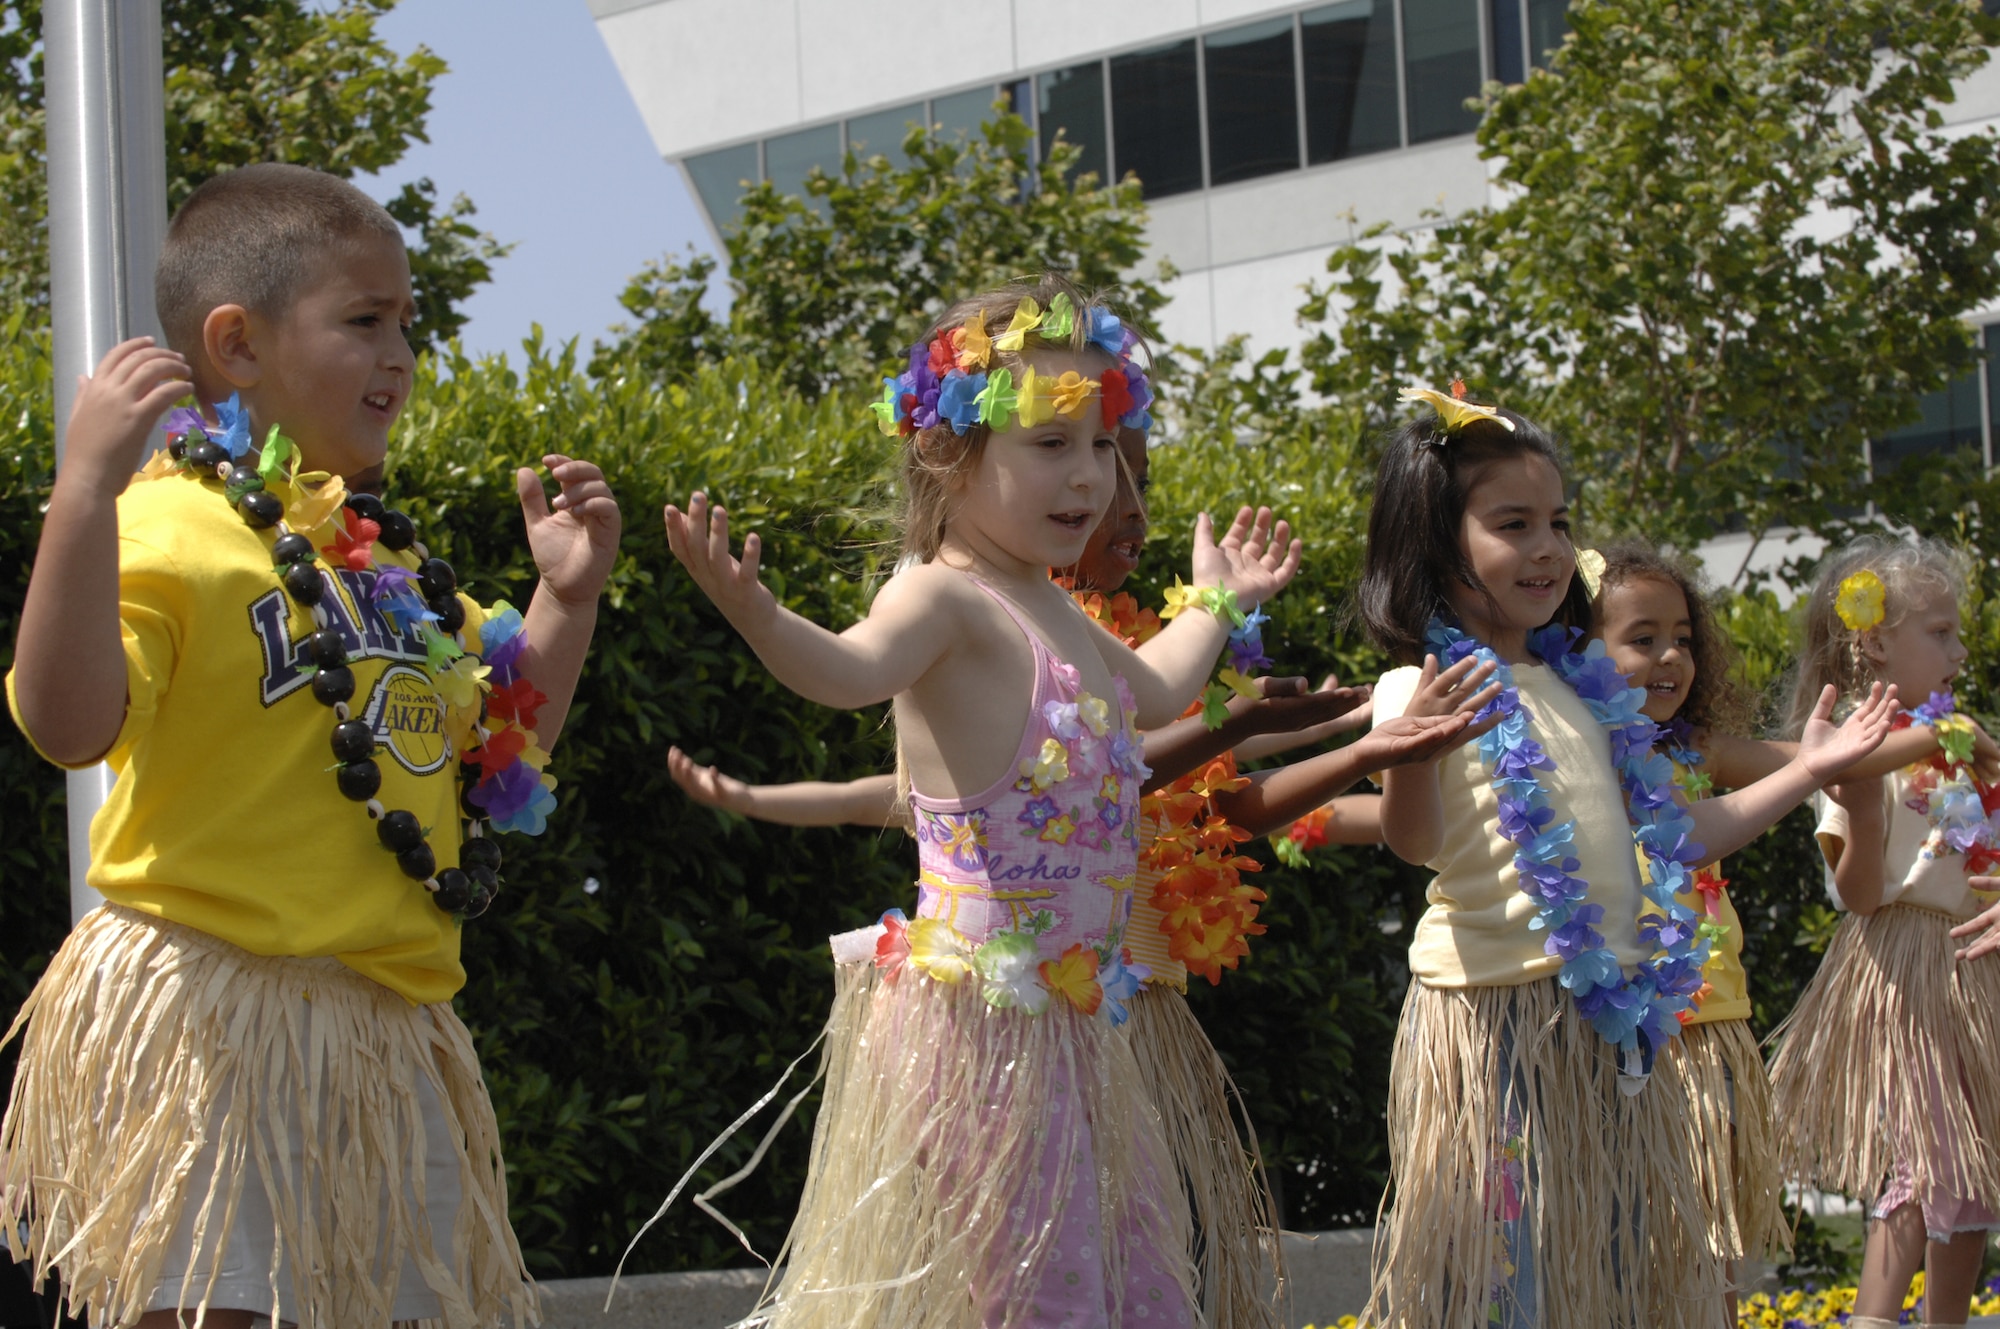 This year’s Asian and Pacific Islander celebration featured a luau and entertainment featuring native dances, music and martial arts demonstrations.  The event was held in the Schriever Space Complex Courtyard, May 22. (Photos by Joe Juarez)